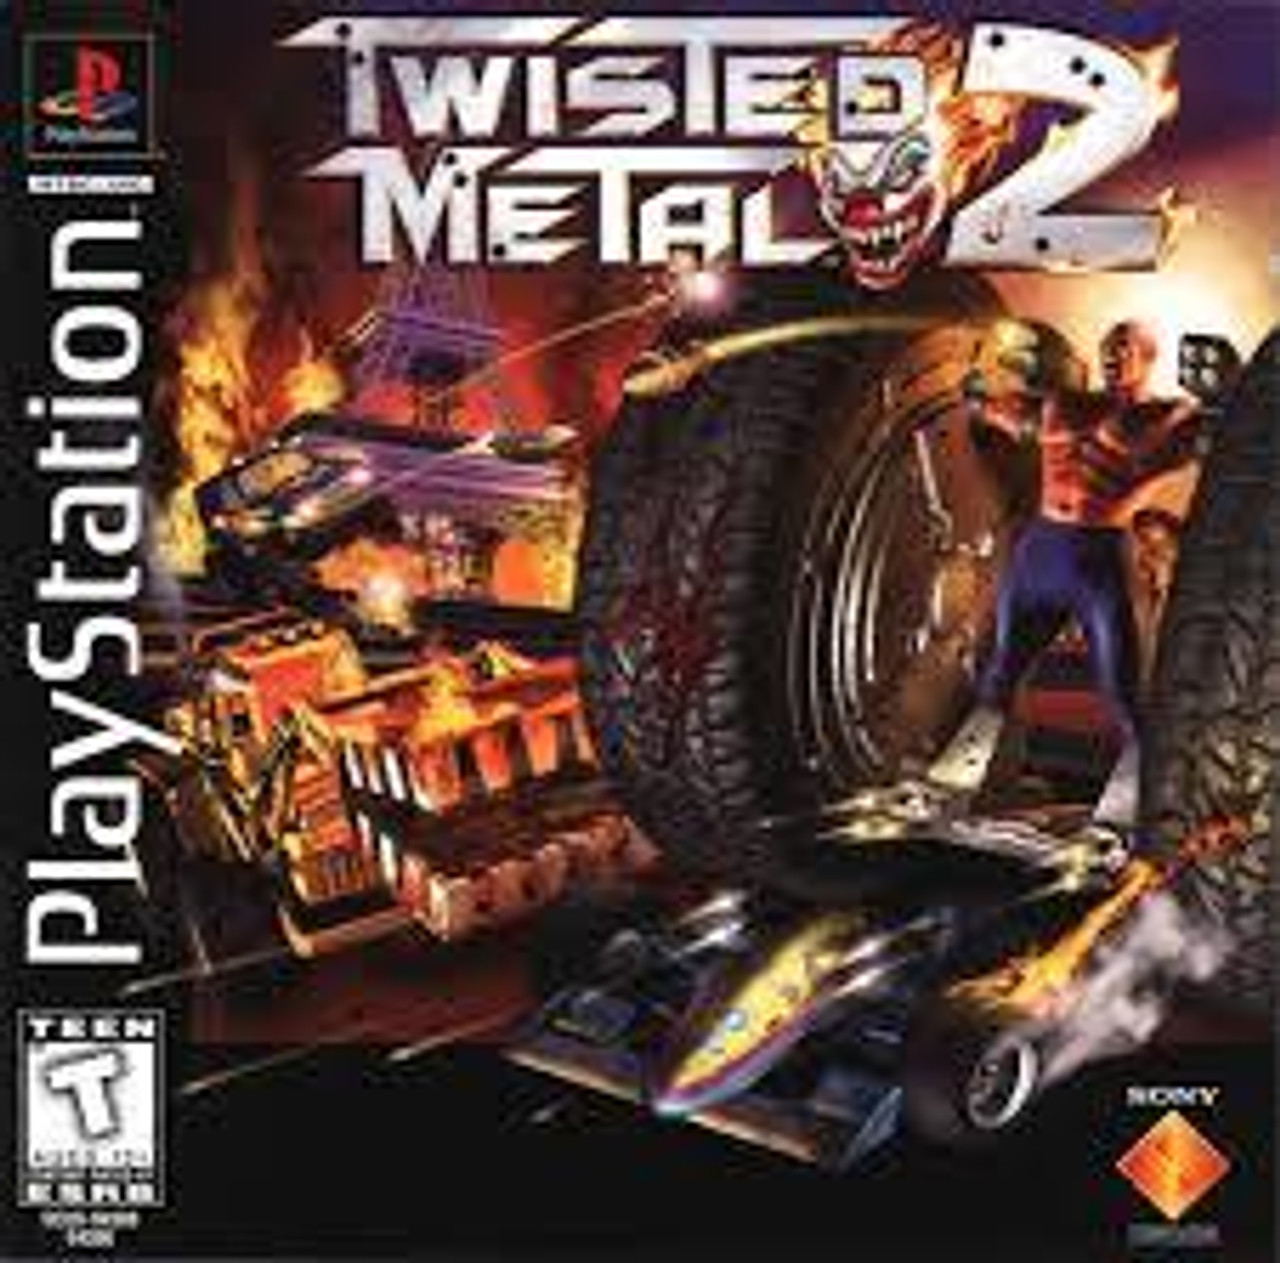 Twisted Metal Similar Games  Playstation, Classic video games, Video game  sales